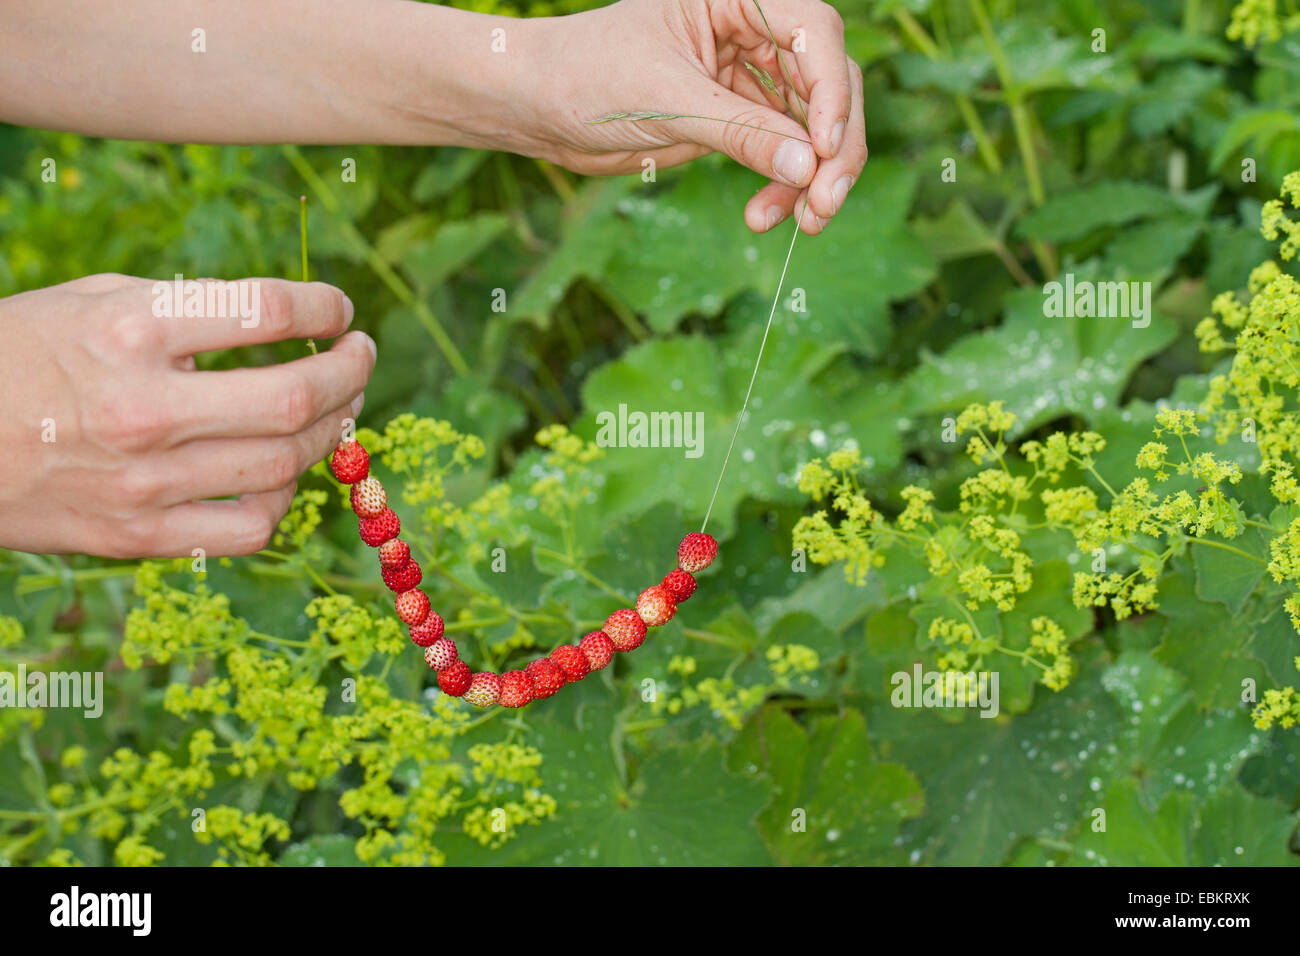 wild strawberry, woodland strawberry, woods strawberry (Fragaria vesca), fruits beaded on a blade of grass, Germany Stock Photo